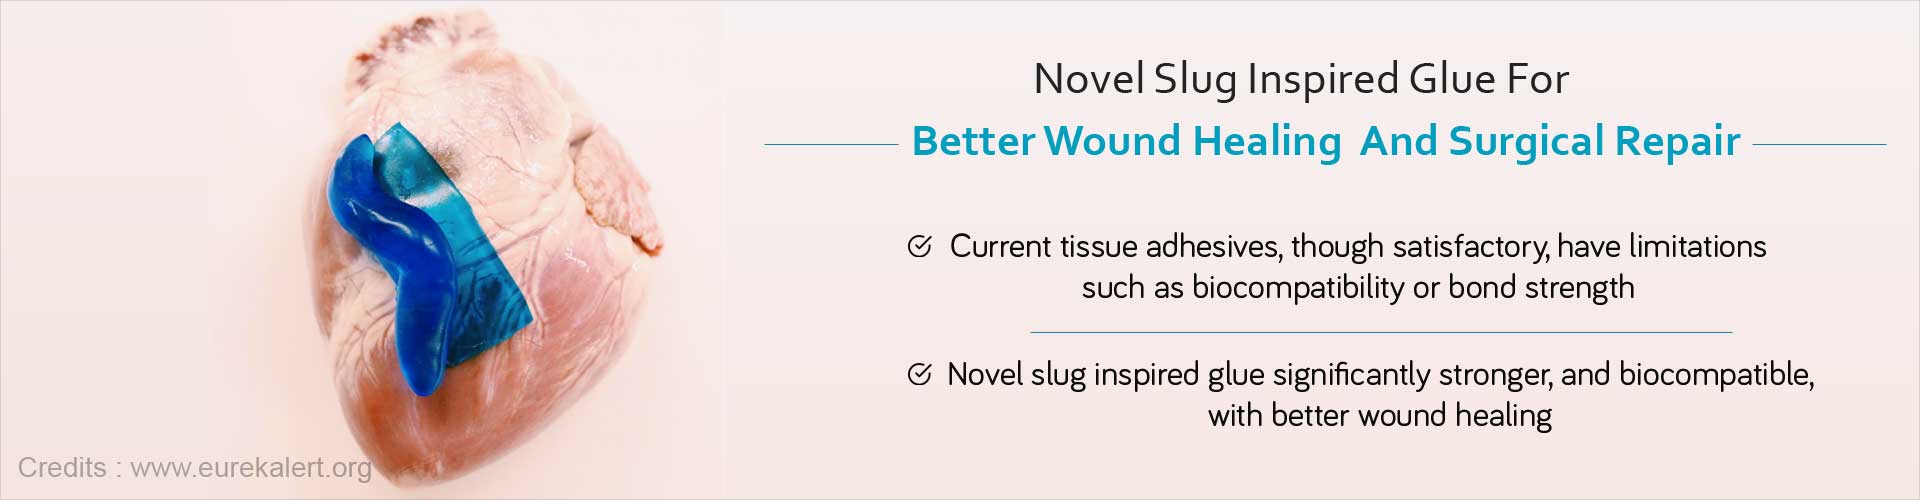 Novel Slug Inspired Glue for Better Wound Healing and Surgical Repair
- Current tissue adhesives, though satisfactory, have limitations such as biocompatibility or bond strength
- Novel slug inspired glue significantly stronger, and bio compatible, with better wound healing
